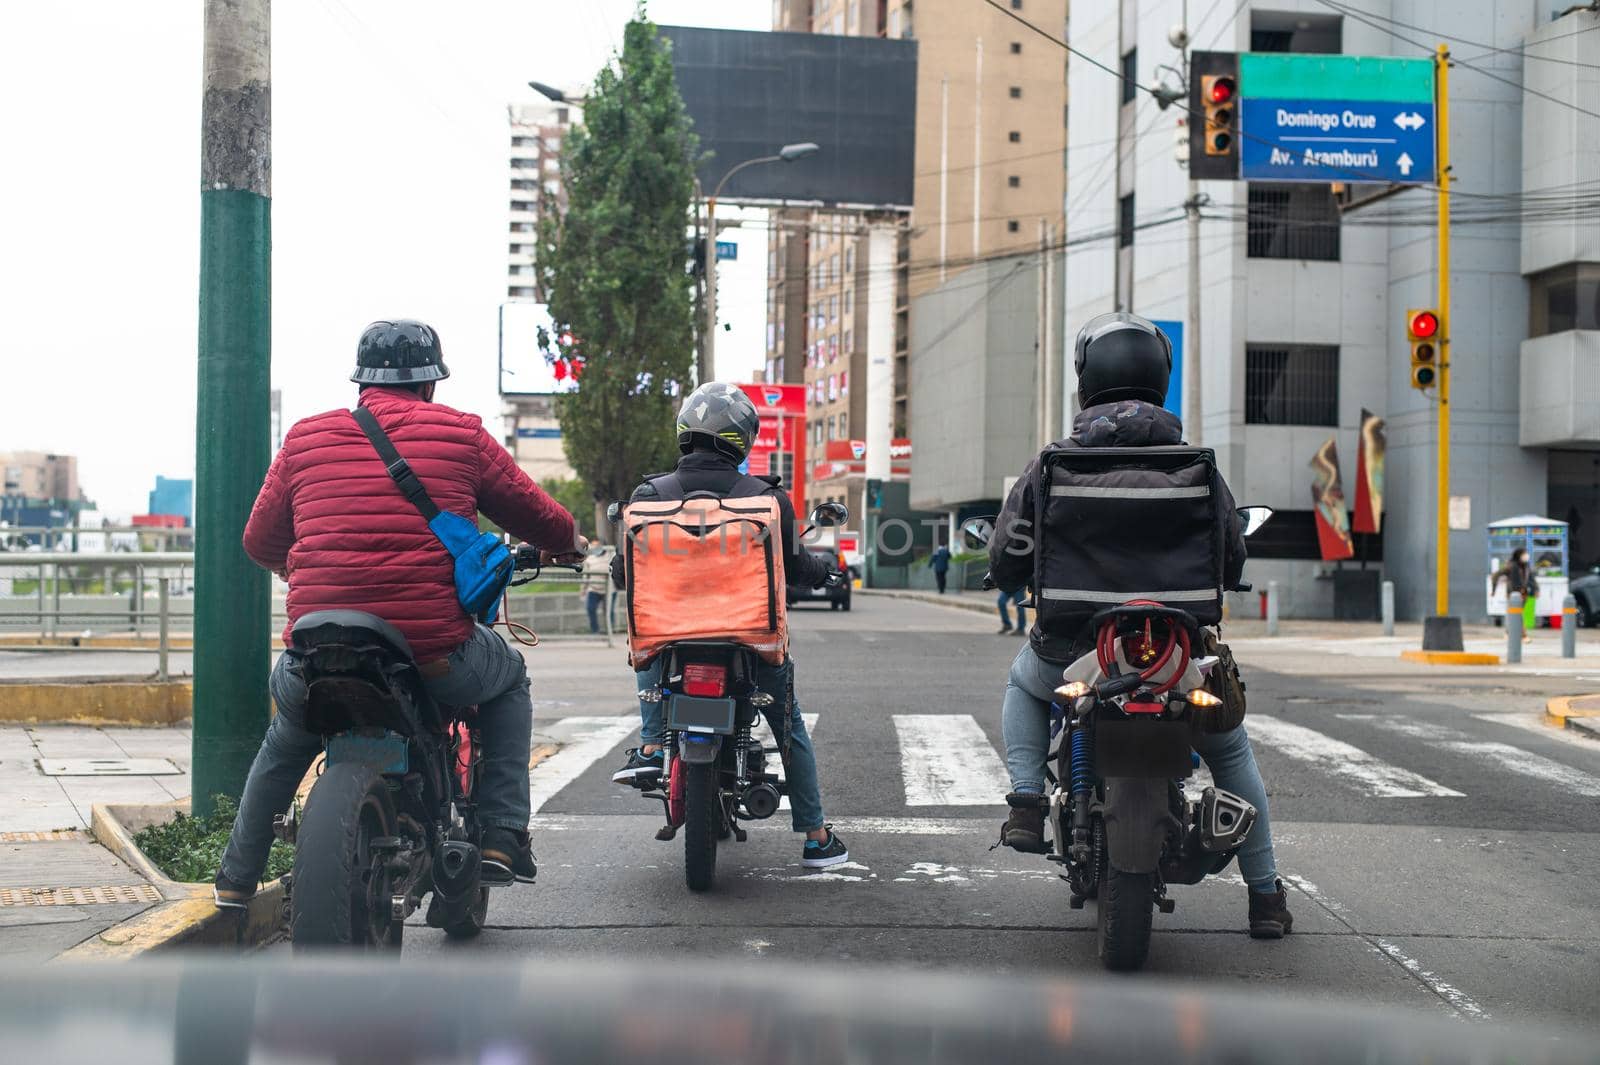 Food delivery driver with backpack on a motorcycle riding along a street. by Peruphotoart